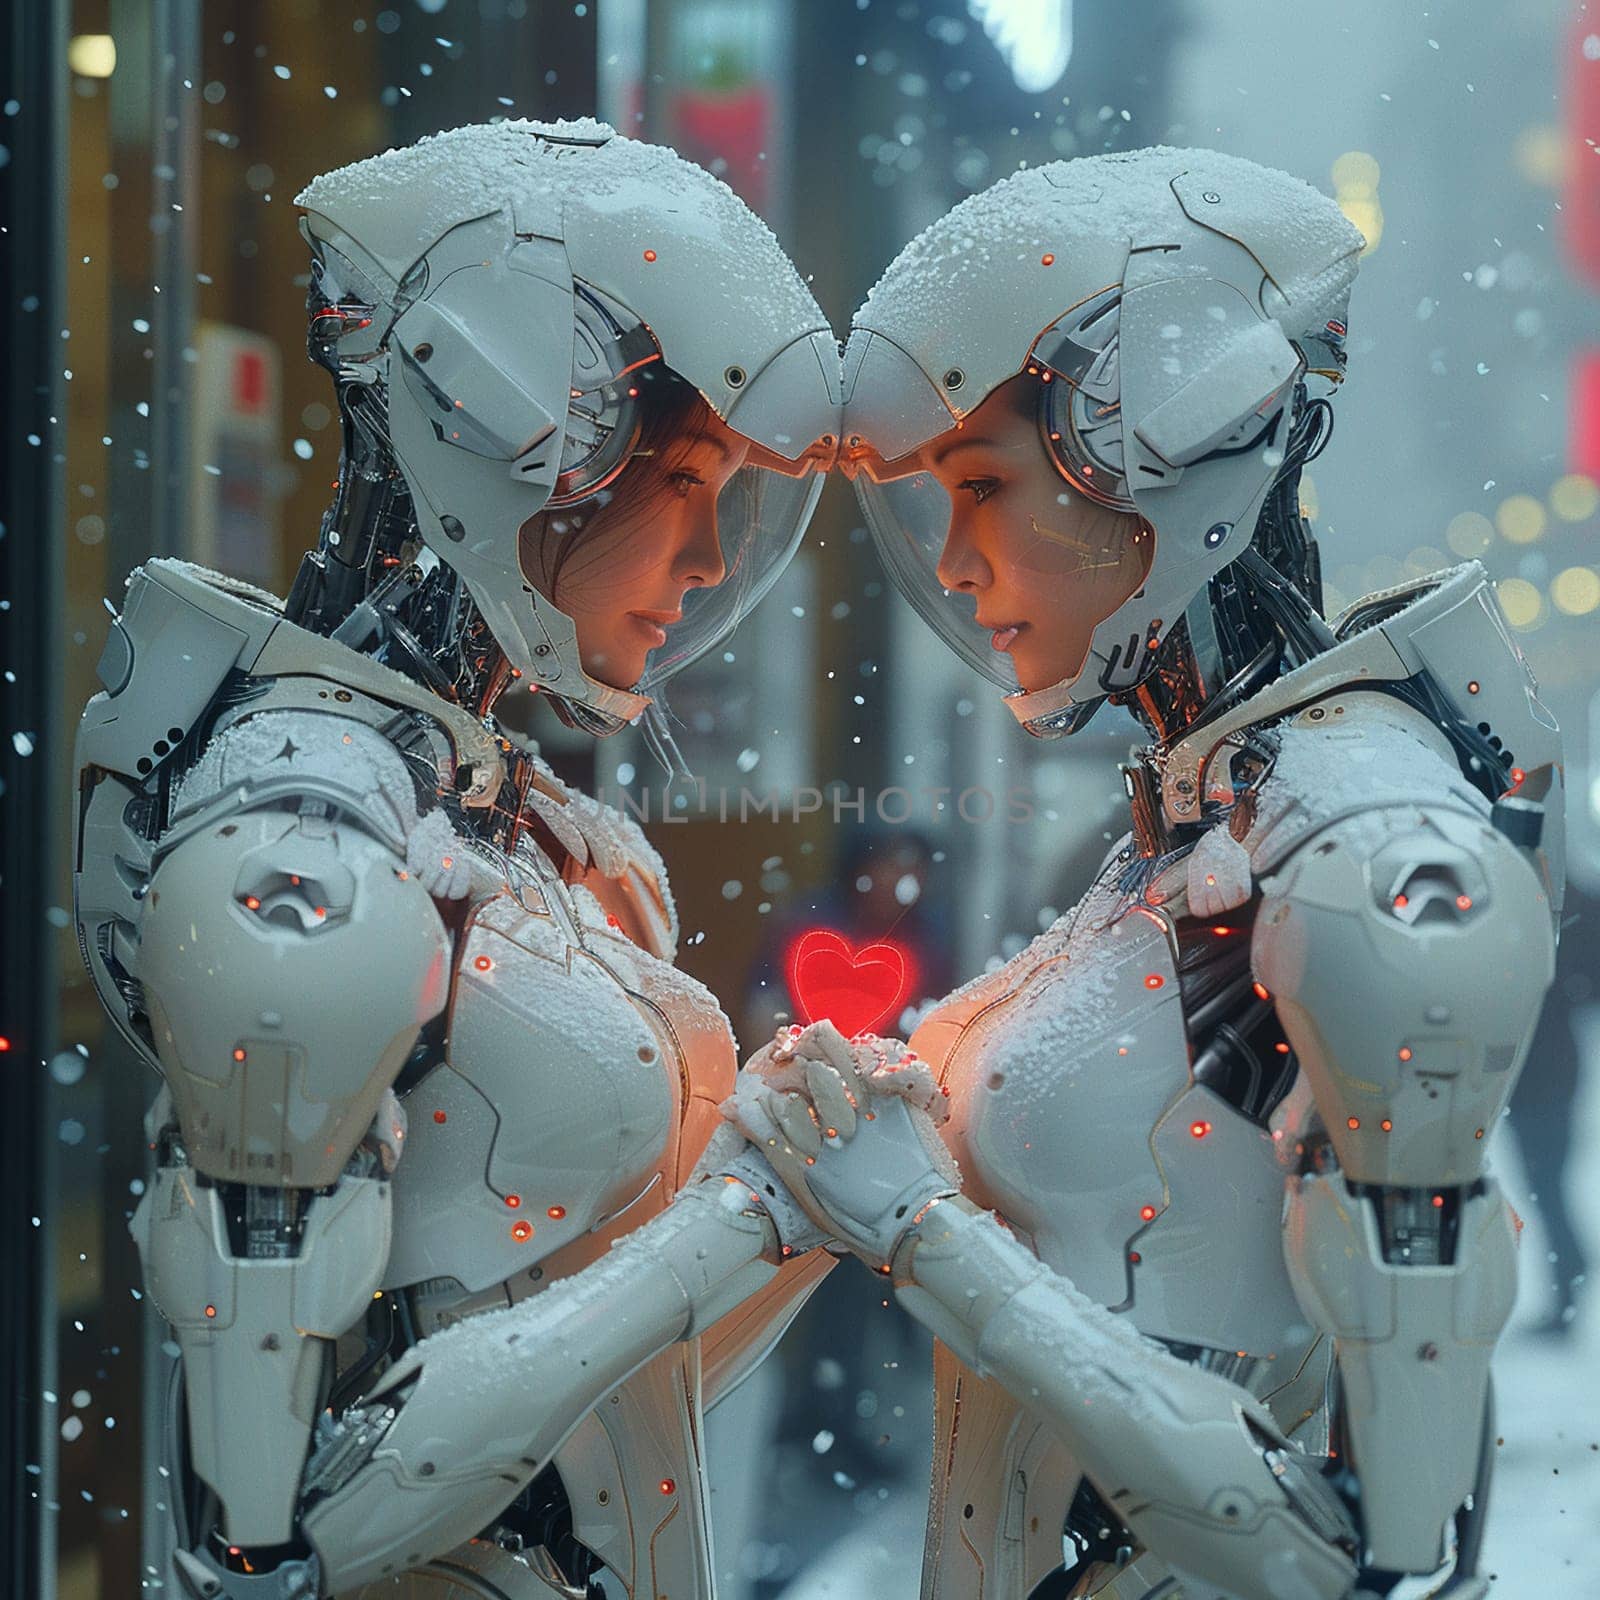 Sci-fi interpretation of White Day celebration with androids exchanging heart-shaped metallic tokens.